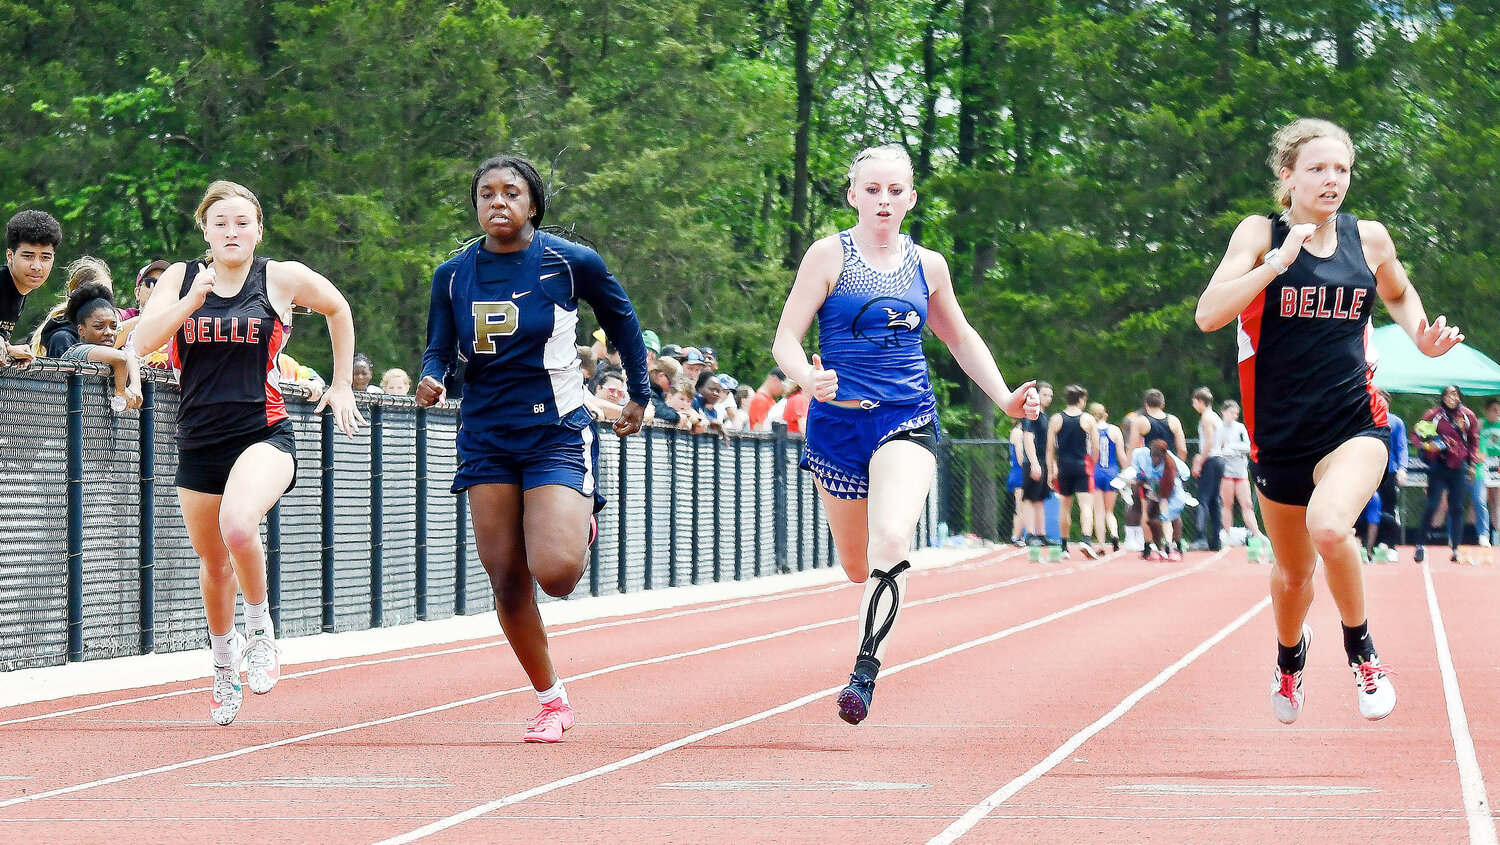 Aubrey Rehmert (far left) and Hali Naber (far right) sprint down the track during the finals of the girls 100-meter dash at the Missouri State High School Activities Association (MSHSAA) Class 2, District 2 meet held Saturday at New Haven High School. Naber placed second to qualify for sectionals.